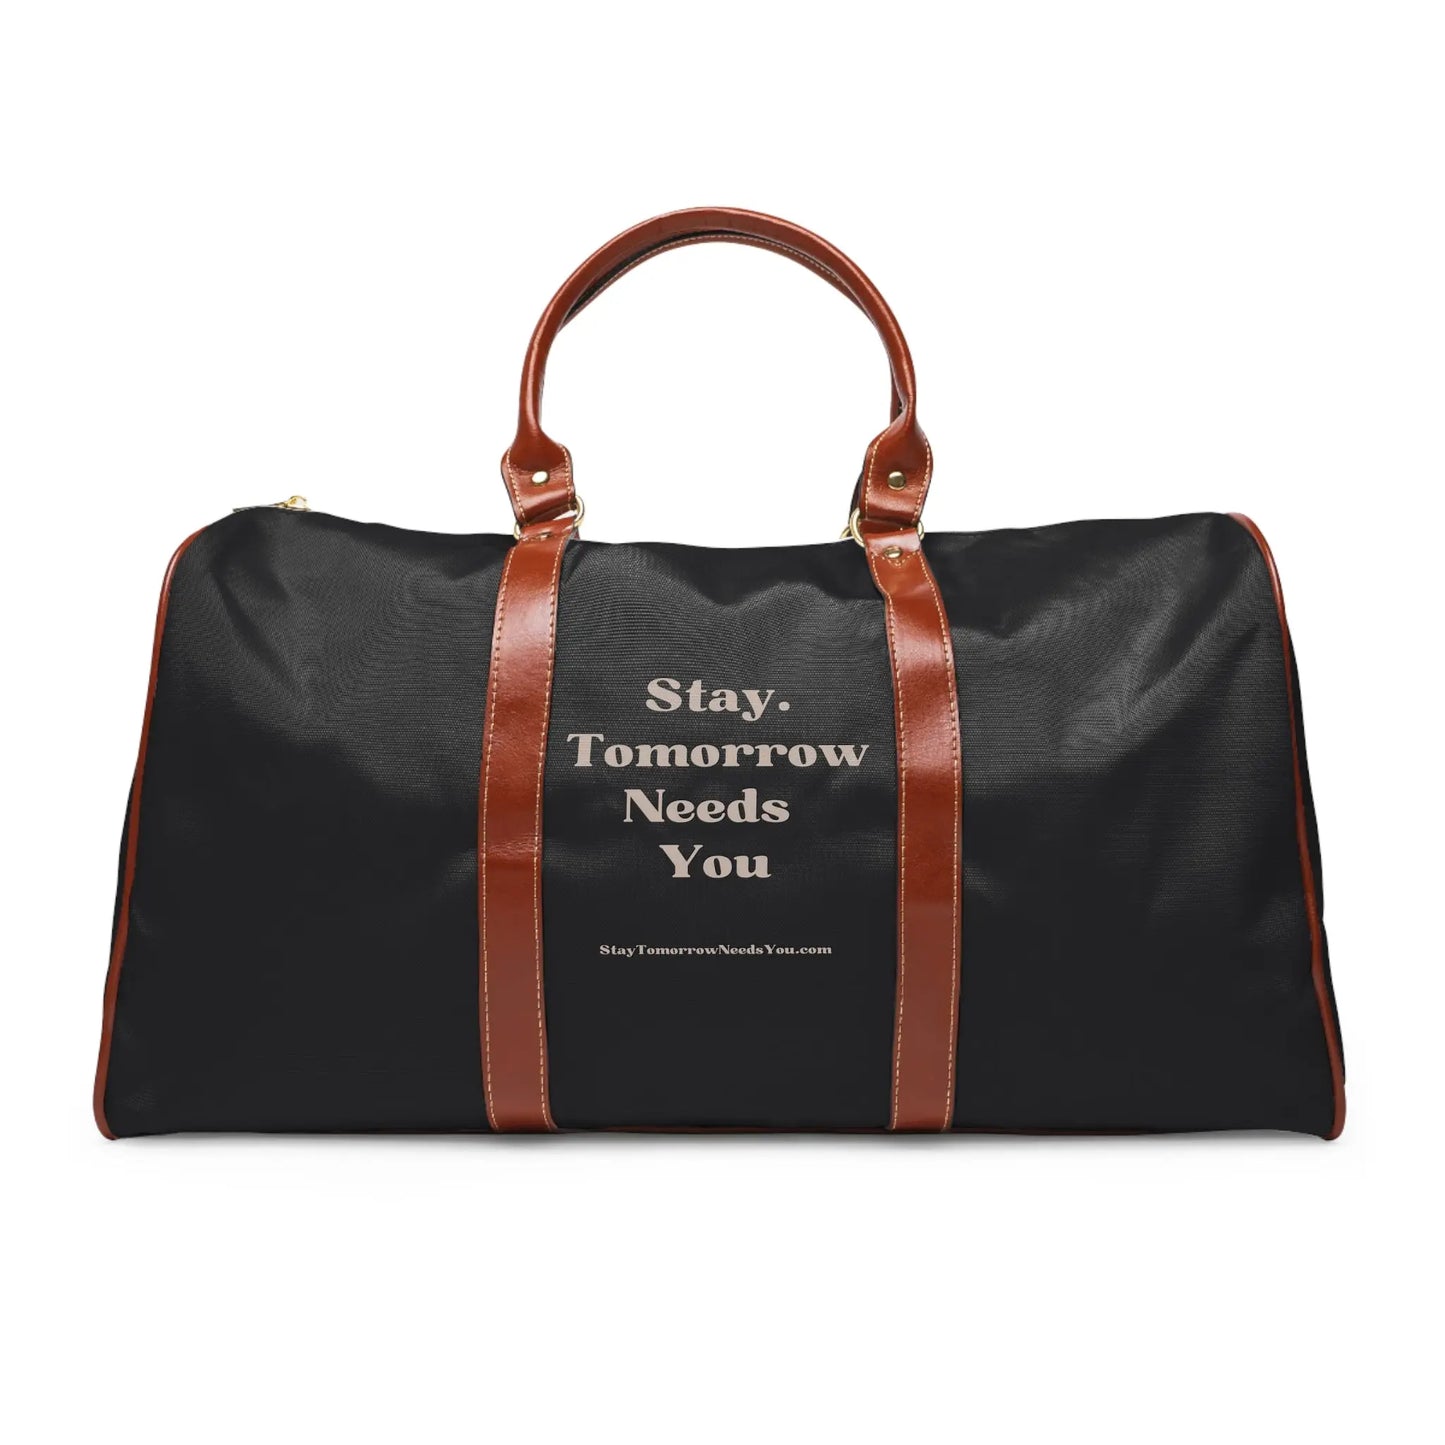 Suicide Awareness Stay Tomorrow Needs You Waterproof Travel Bag - Ideal for Mother’s Day travels. Carry essentials with purpose, supporting mental health awareness. Shop now